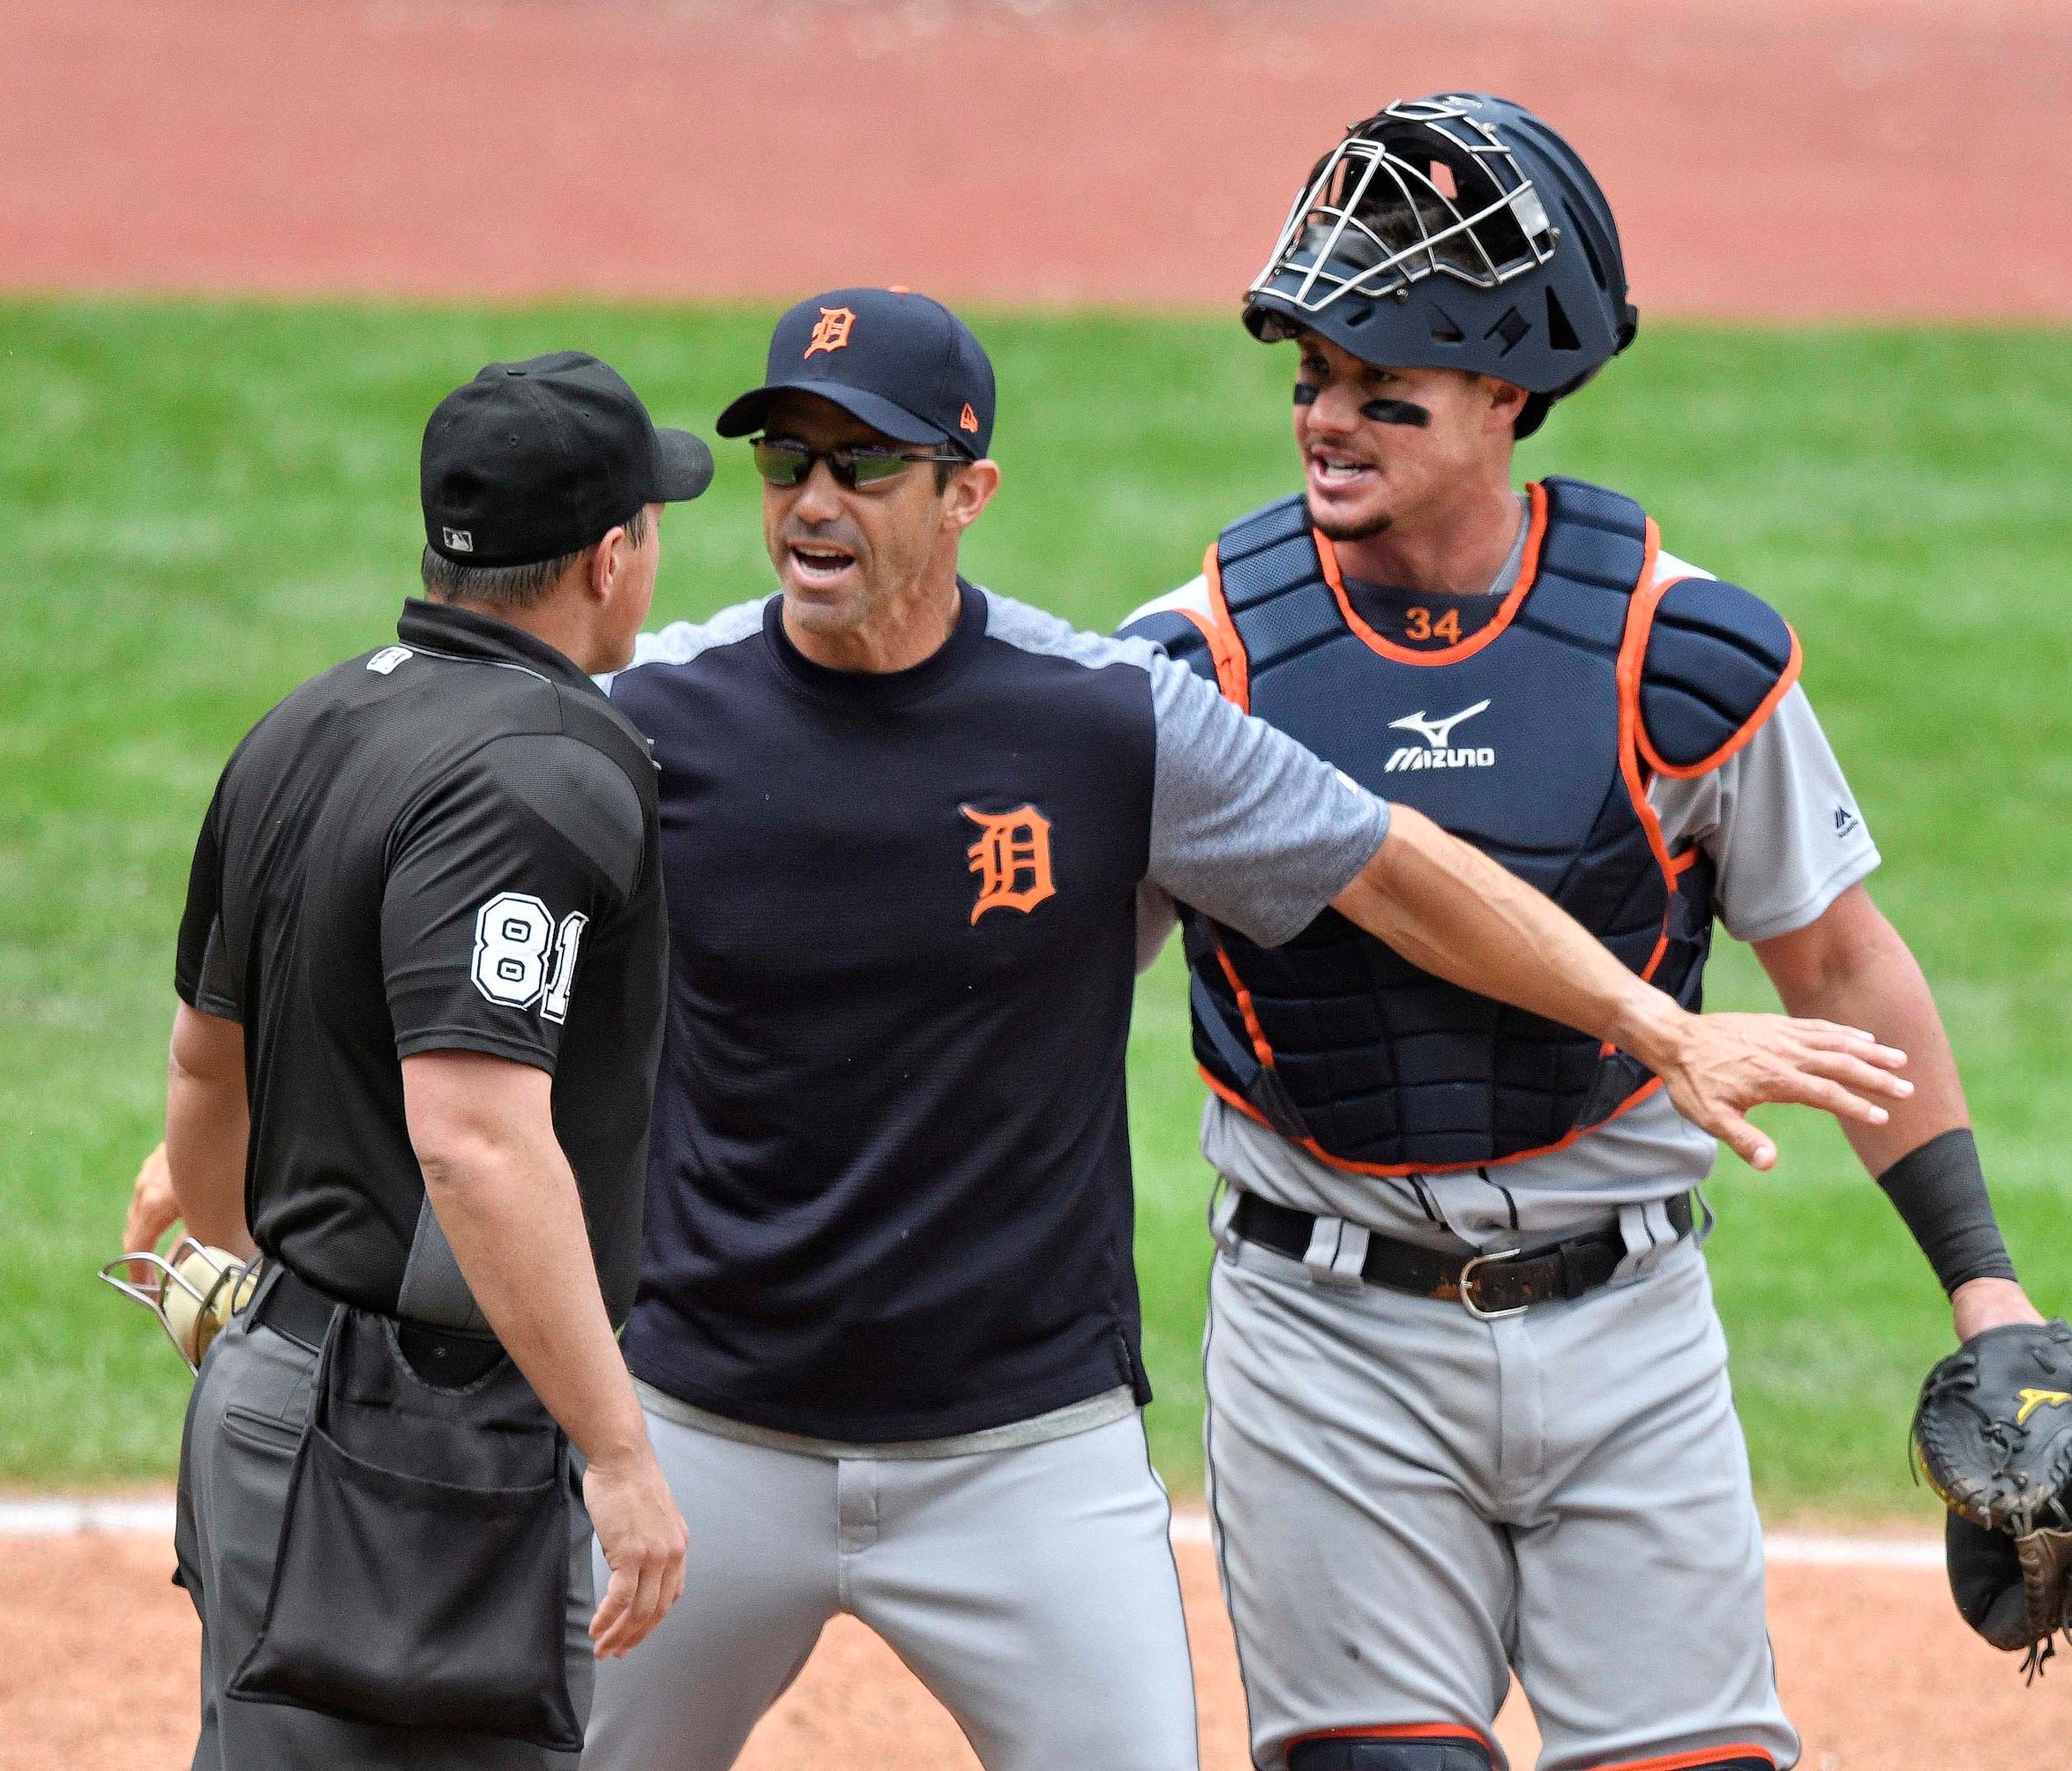 Tigers manager Brad Ausmus stands between home plate umpire Quinn Wolcott and catcher James McCann after McCann was ejected.